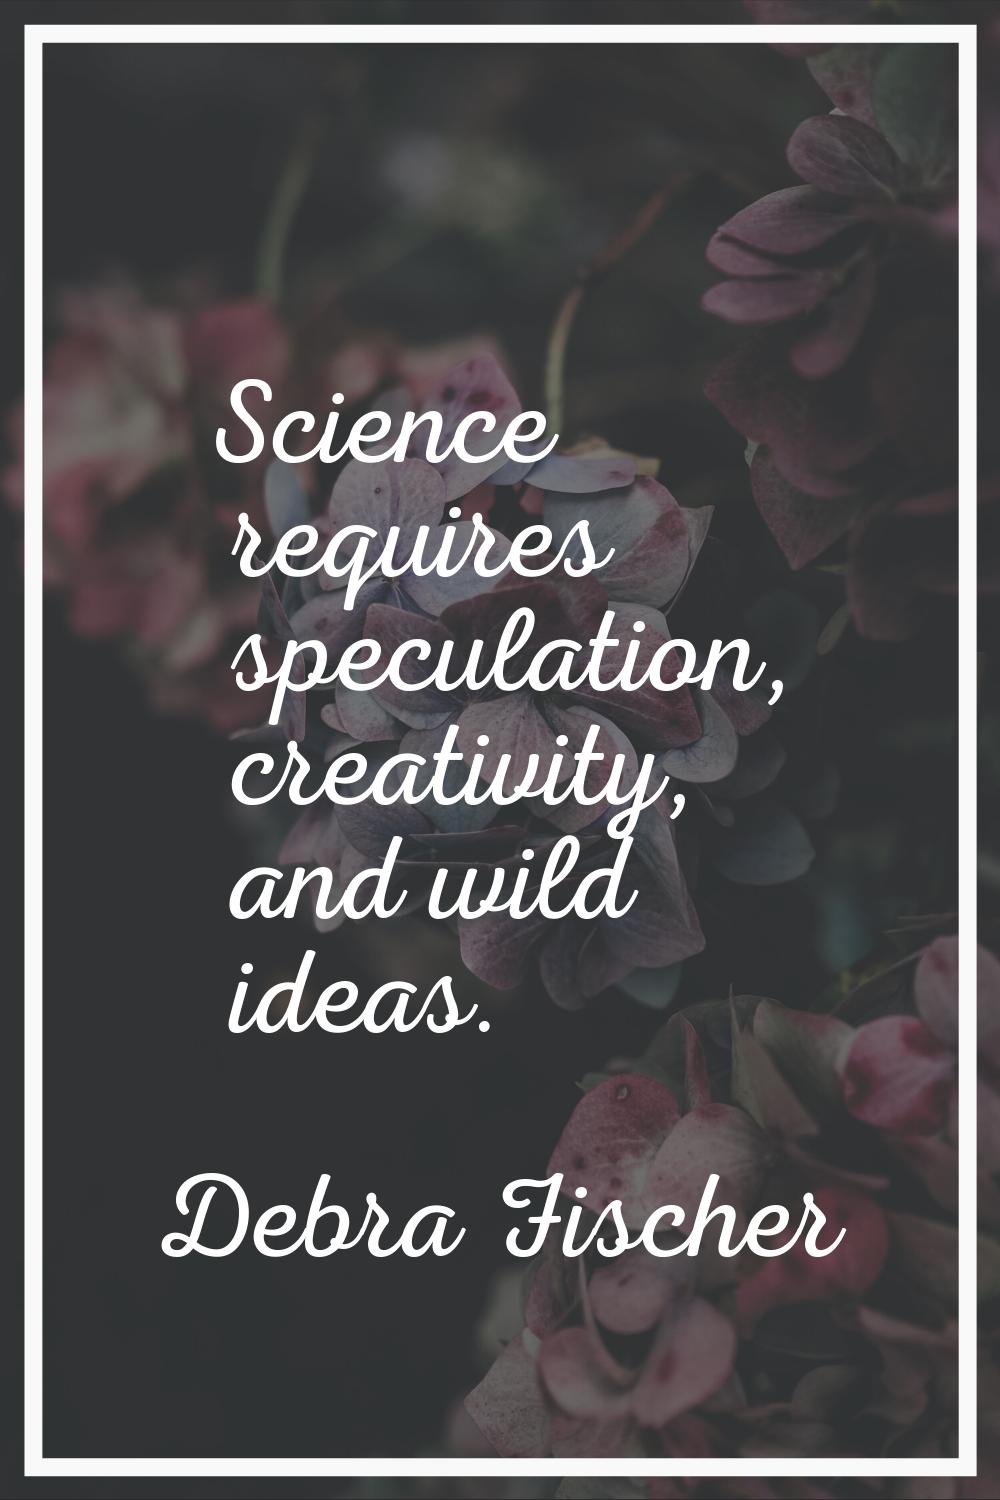 Science requires speculation, creativity, and wild ideas.